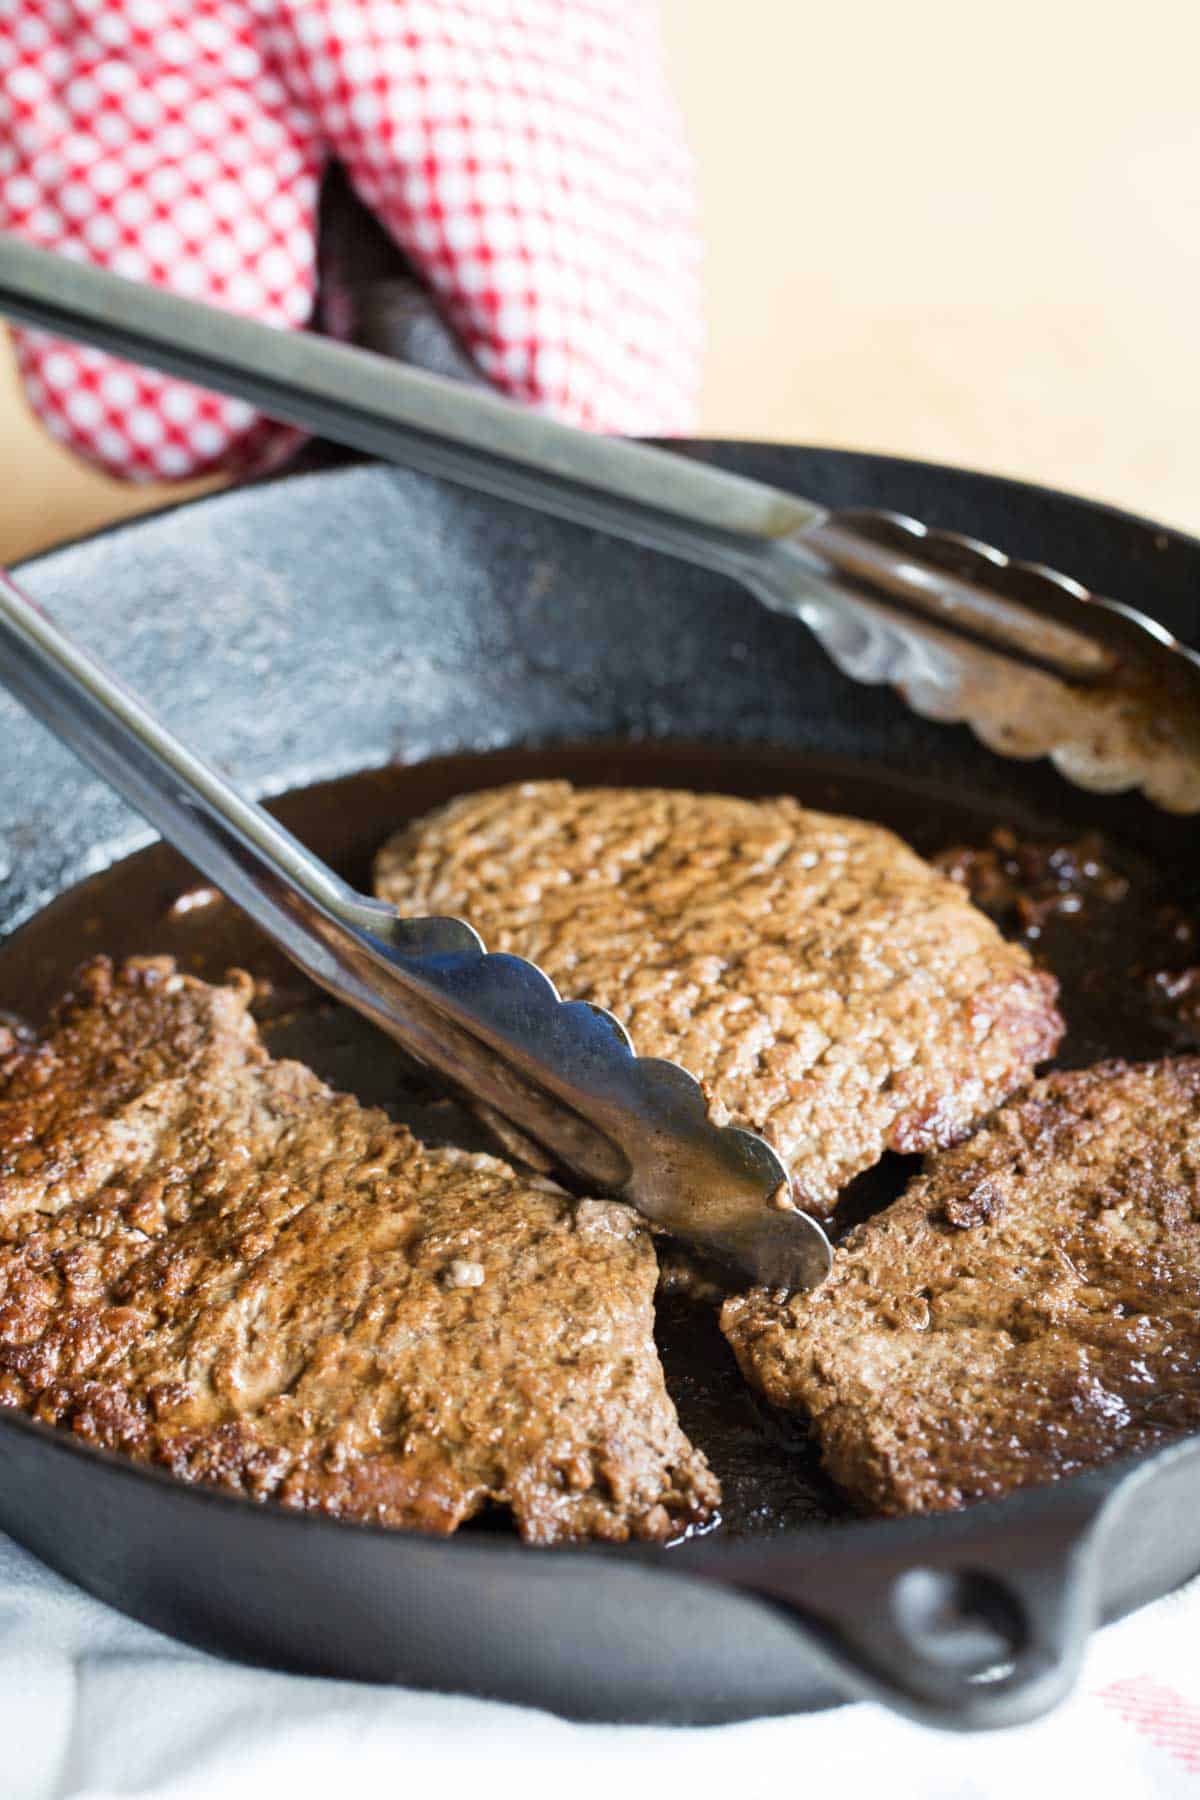 Cube steaks cooking in a cast iron skillet.